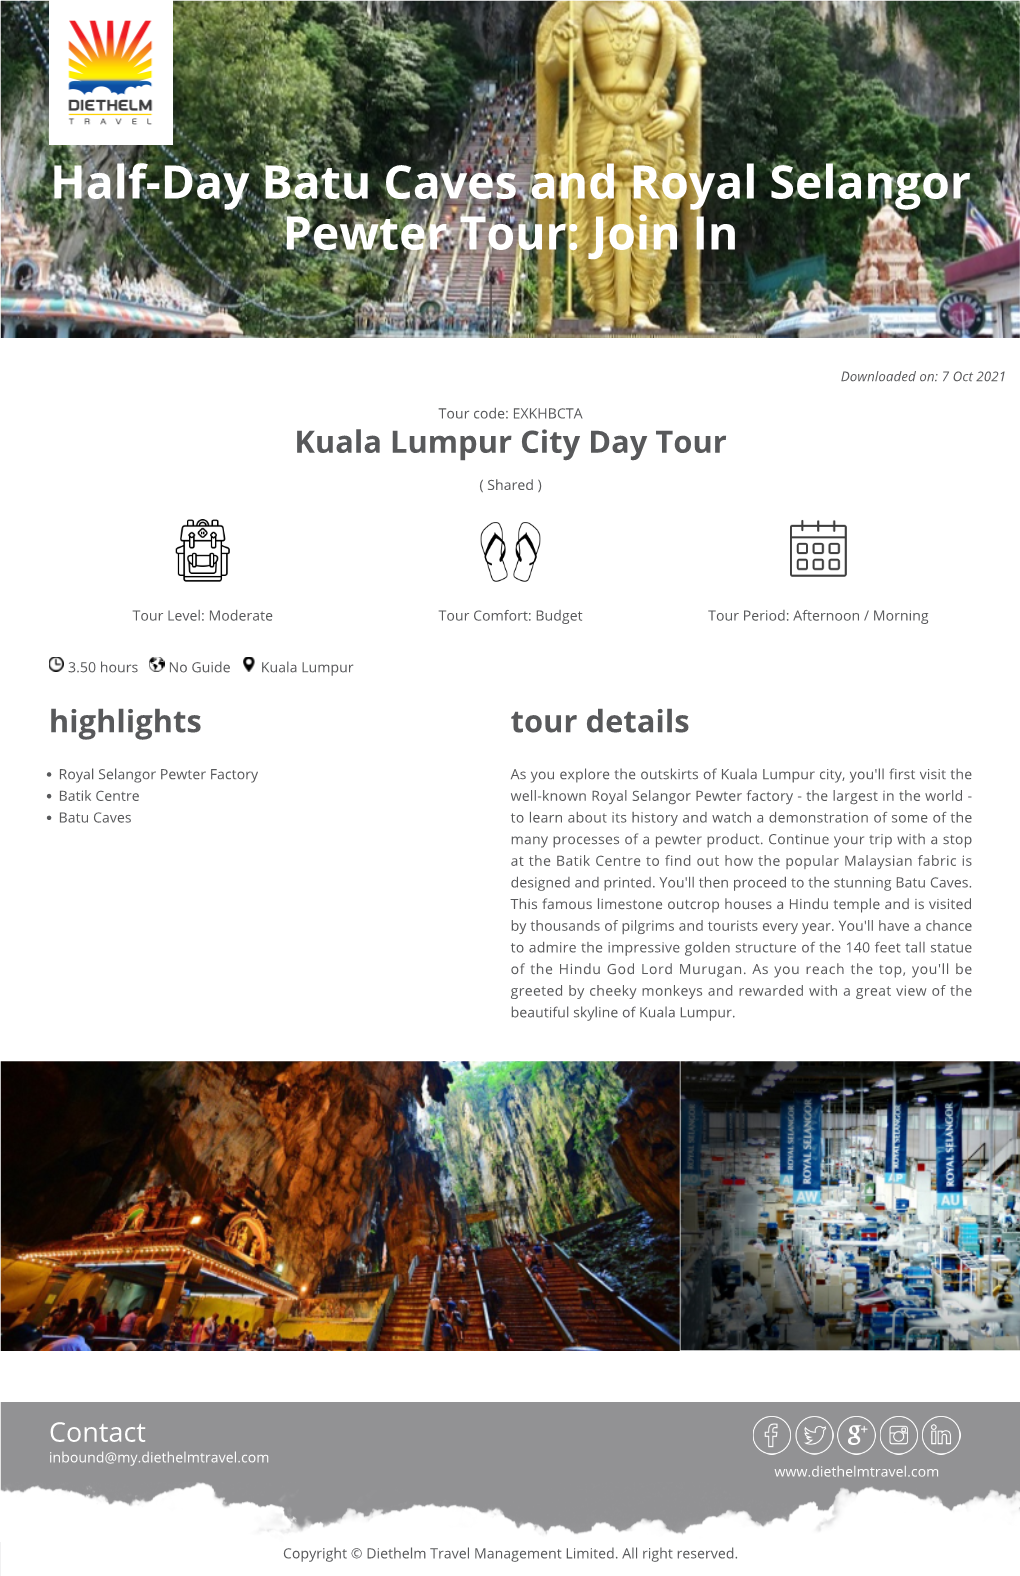 Half-Day Batu Caves and Royal Selangor Pewter Tour: Join In